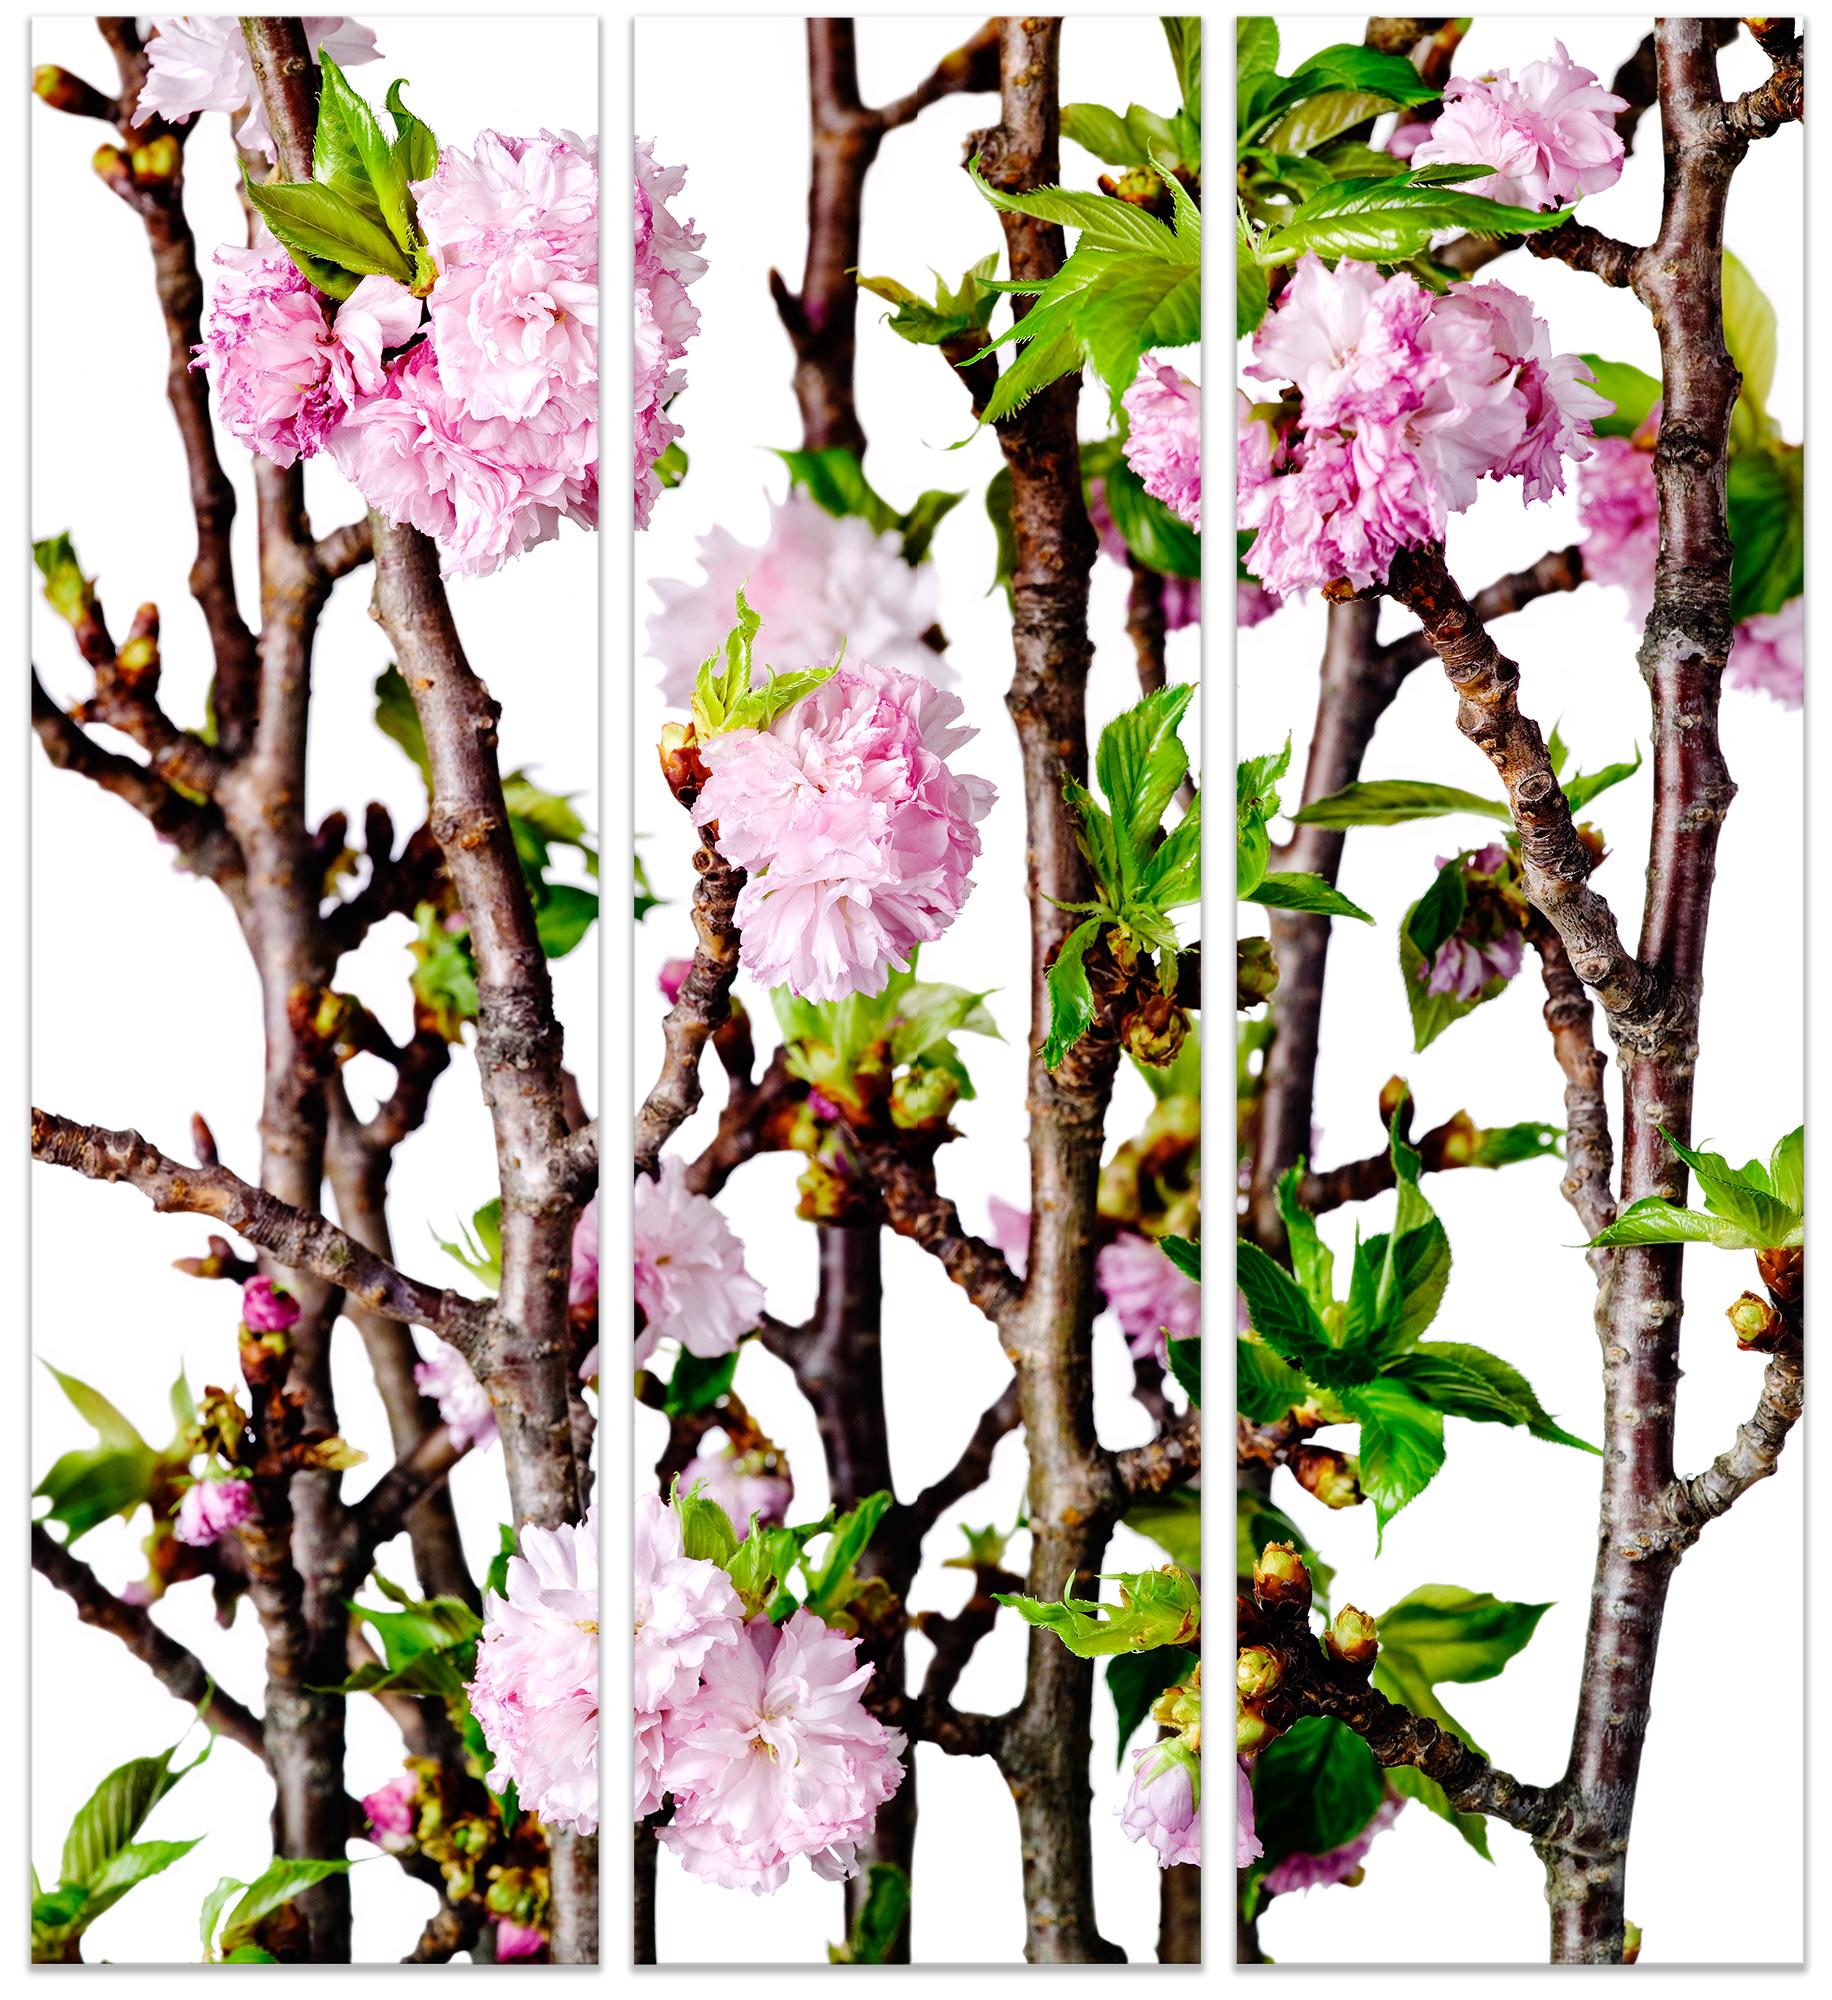 CHERRY BLOSSOM TRIPTYCH, large scale (66 x 59 ") on Dibond under Acrylic glass 